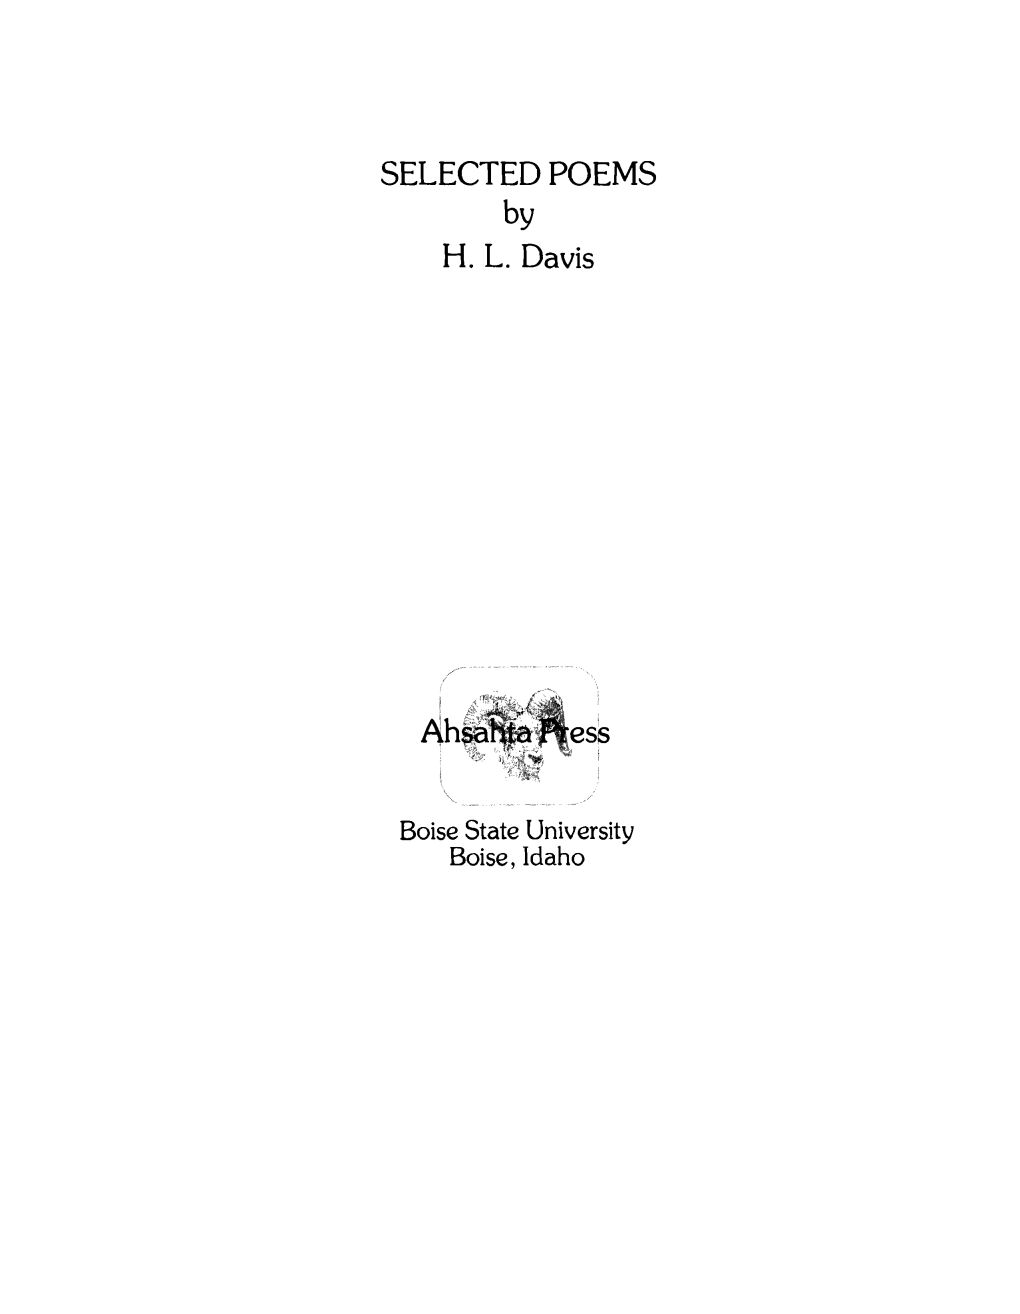 SELECTED POEMS by H